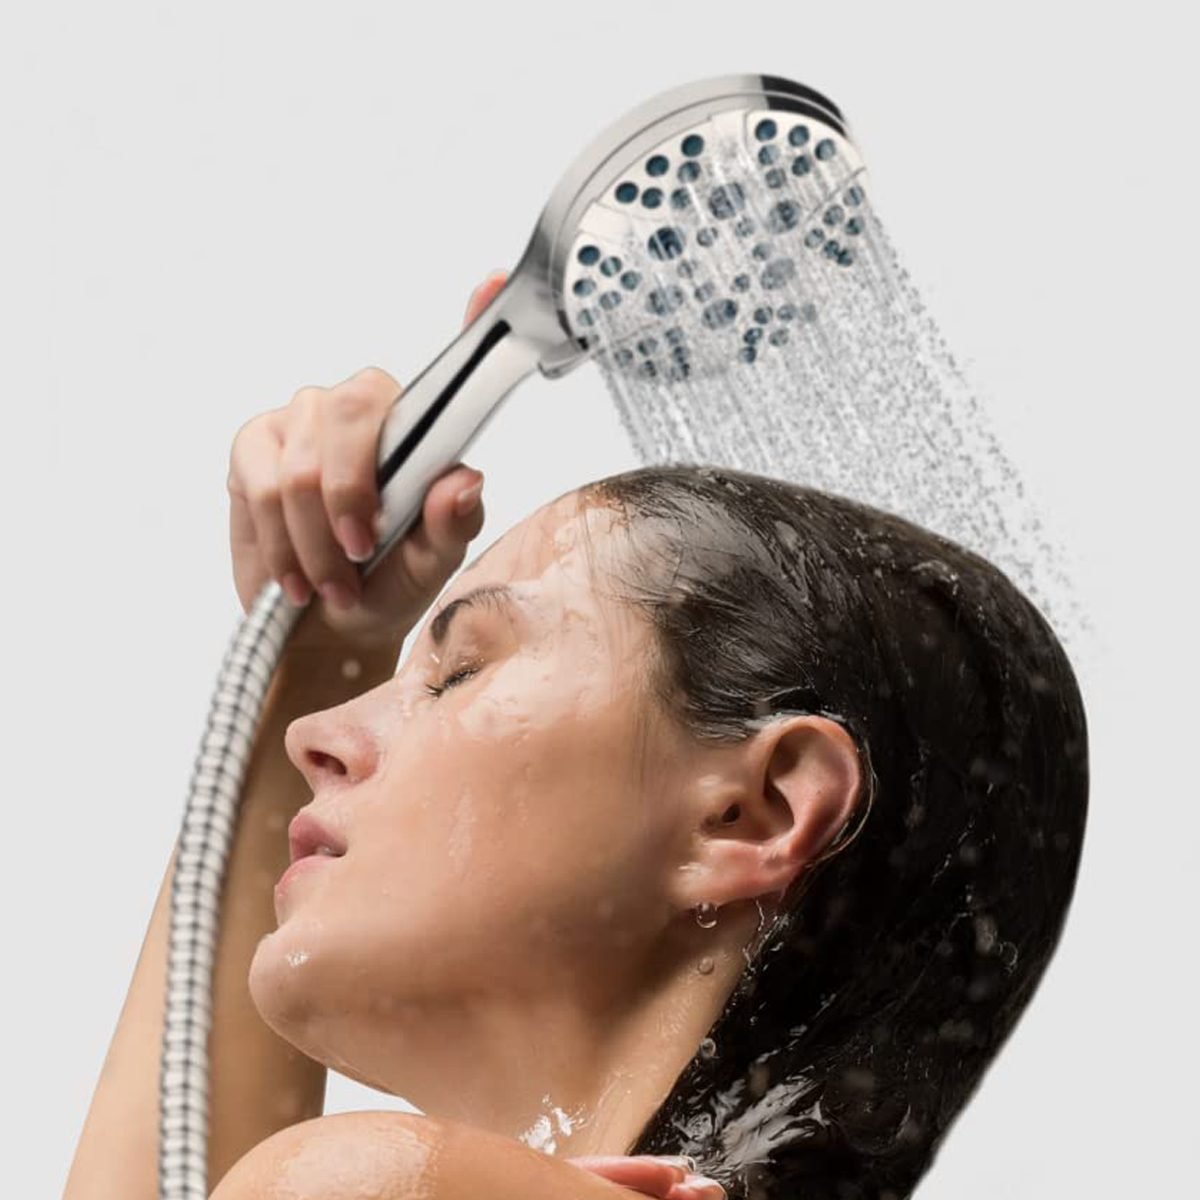 Over 15,000 Shoppers Use This Showerhead to Clean Their Showers (and It's on Sale)